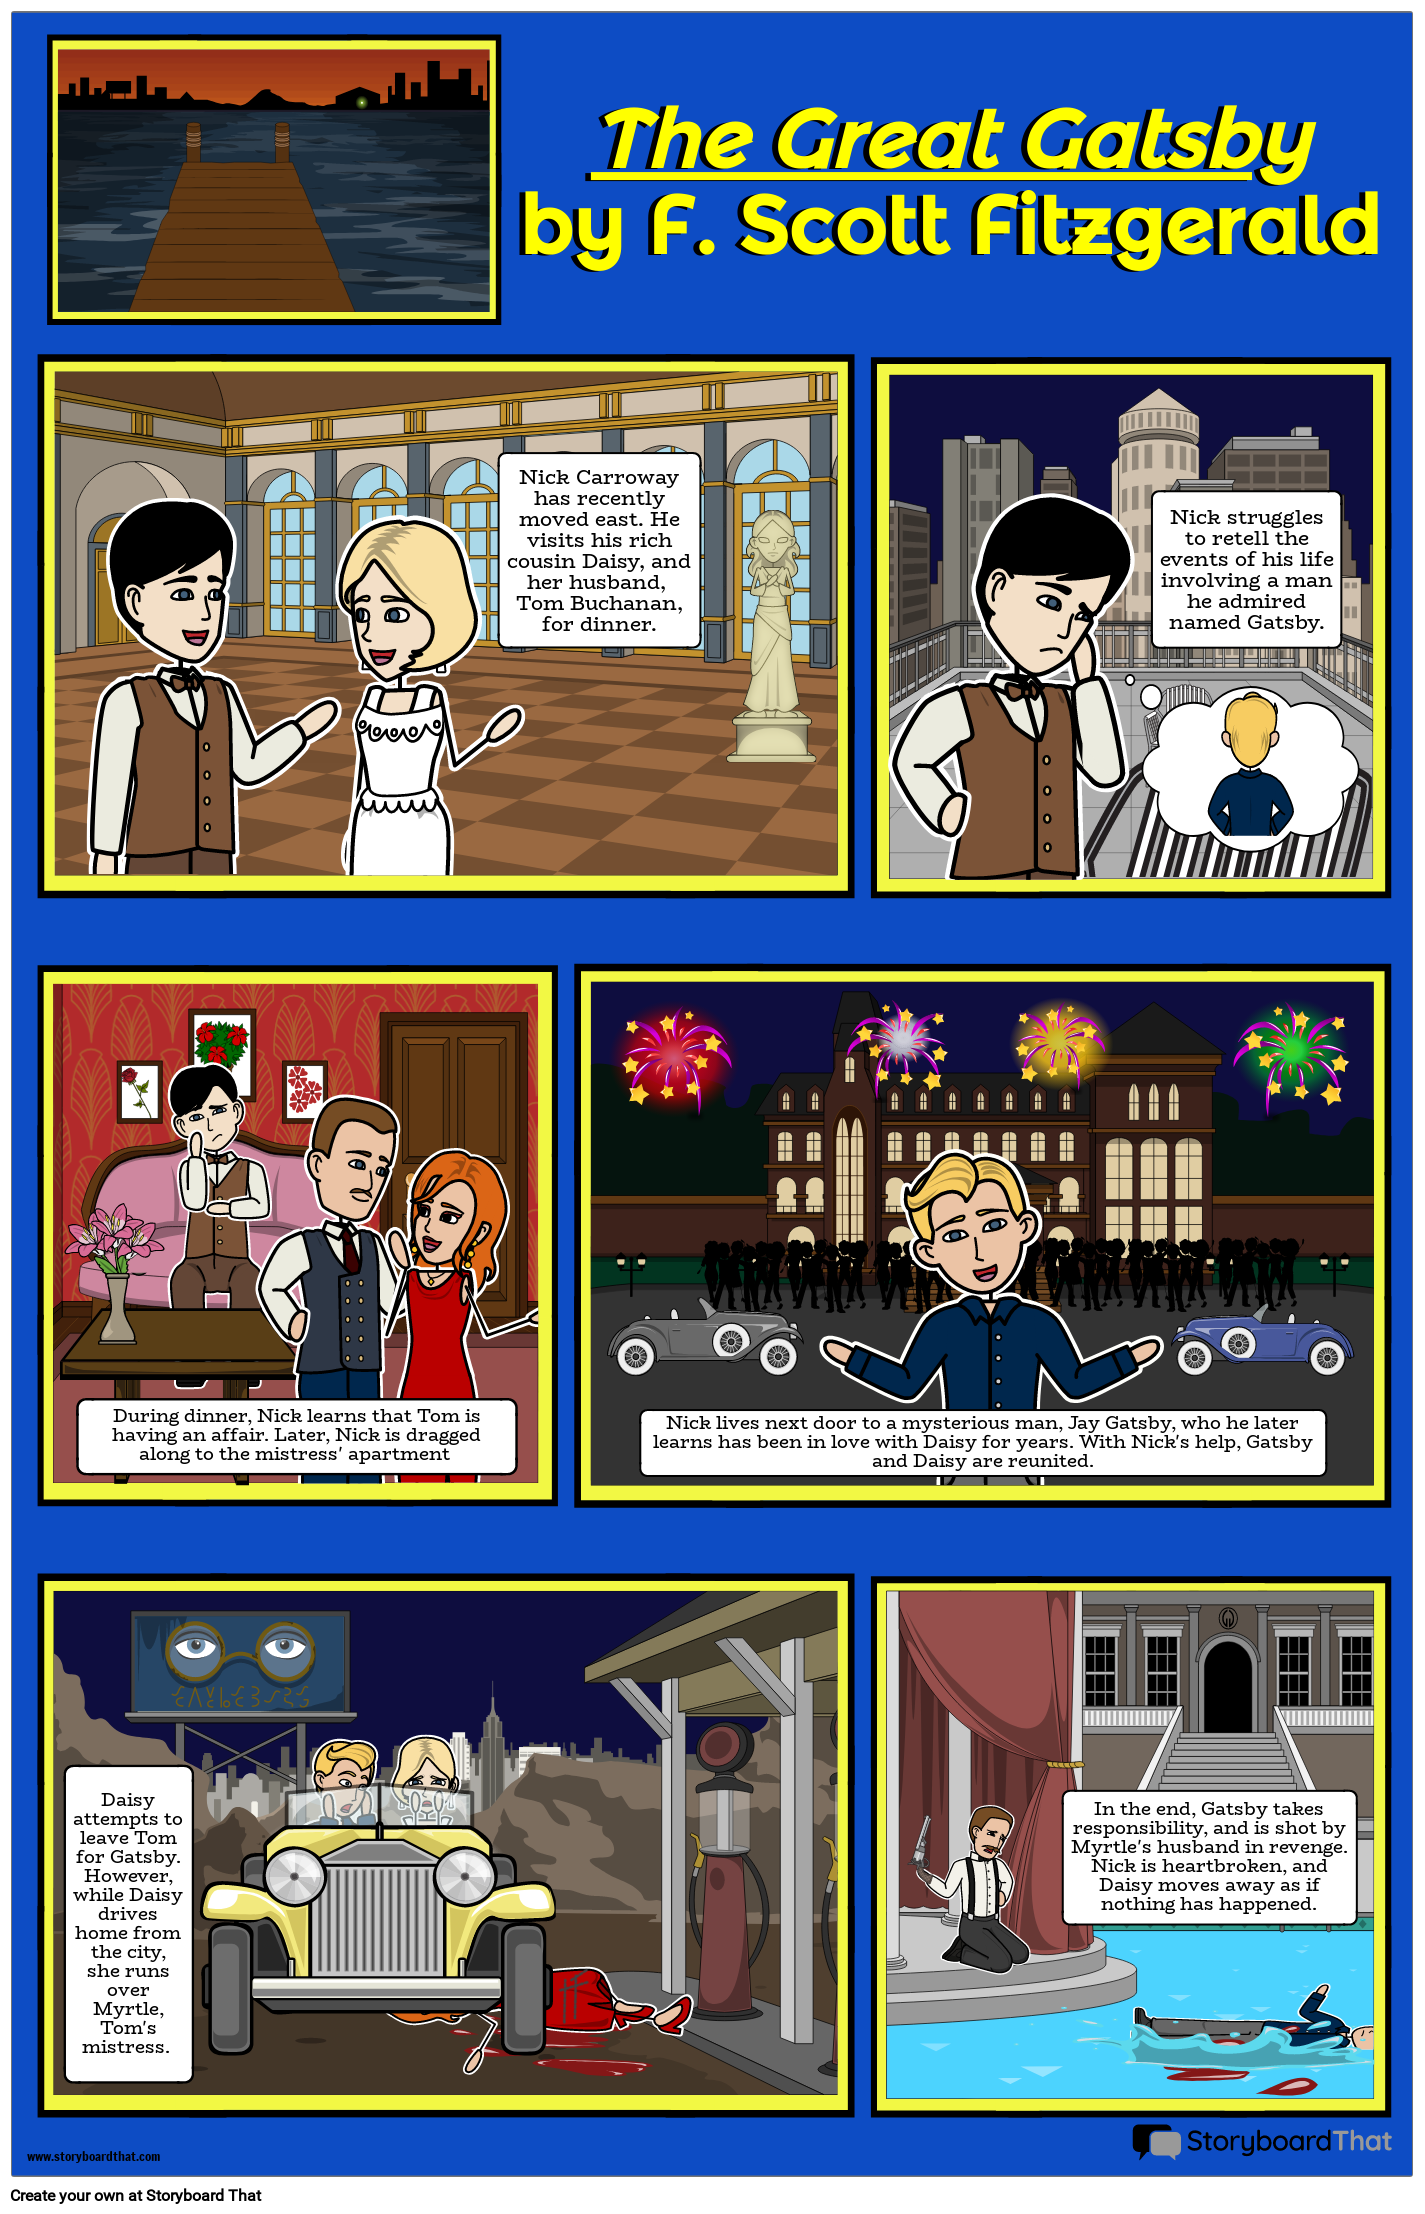 Creating a Graphic Novel — Graphic Novel Examples & Project Ideas |  StoryboardThat